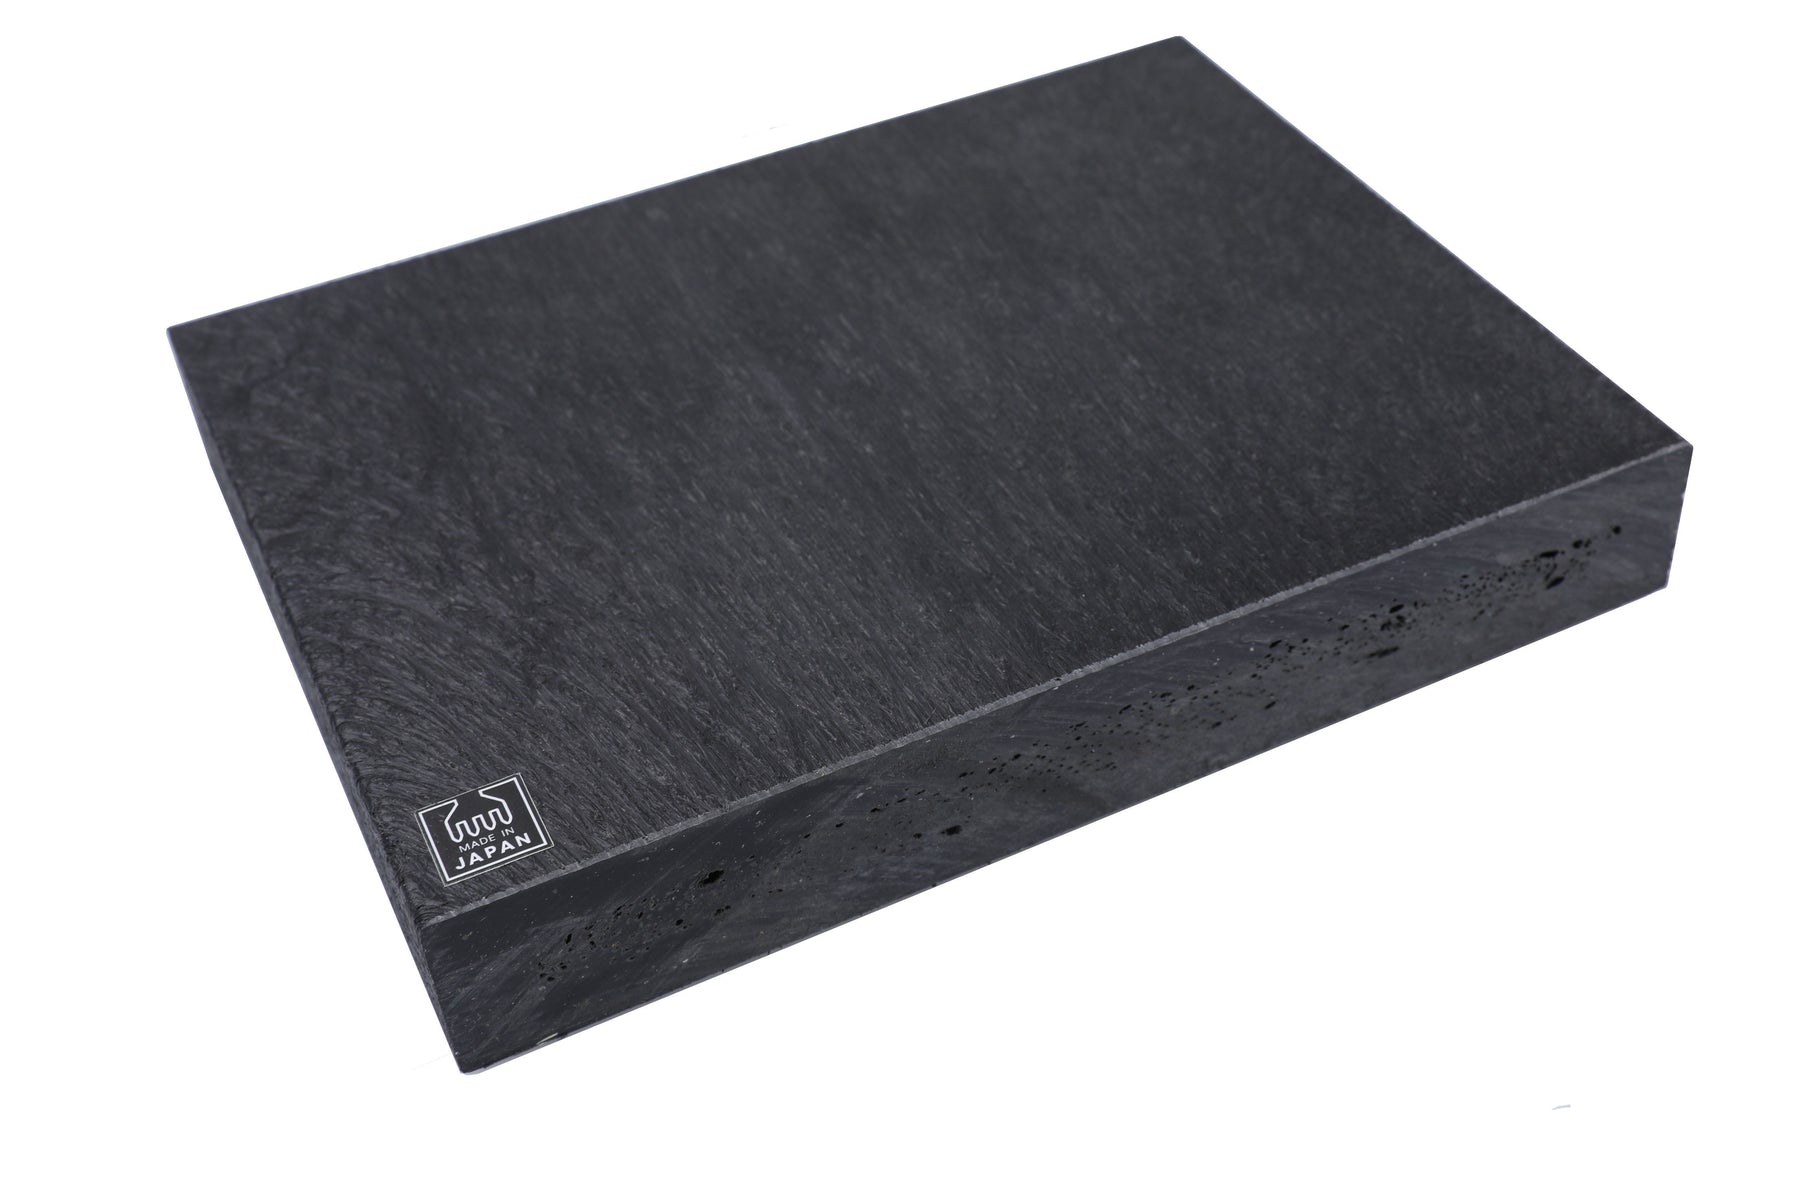 Japanese Black Rubber Large Punching Cutting Board 30mm X 200mm X 300mm 